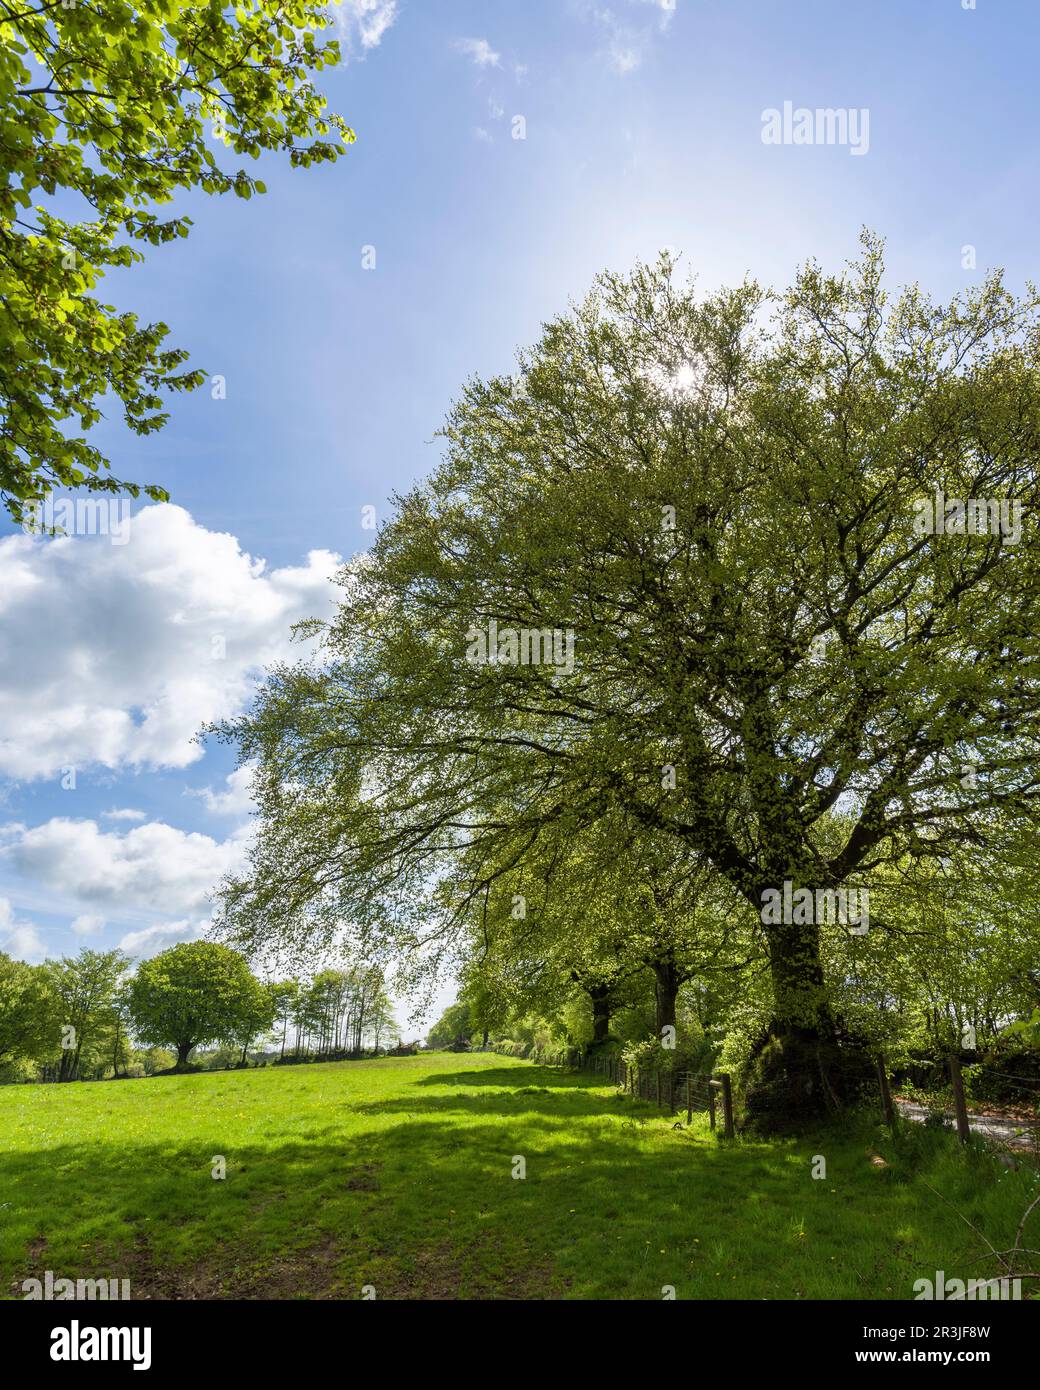 Common Beech trees on the edge of a field in spring in the Brendon Hills near Clatworthy, Somerset, England. Stock Photo